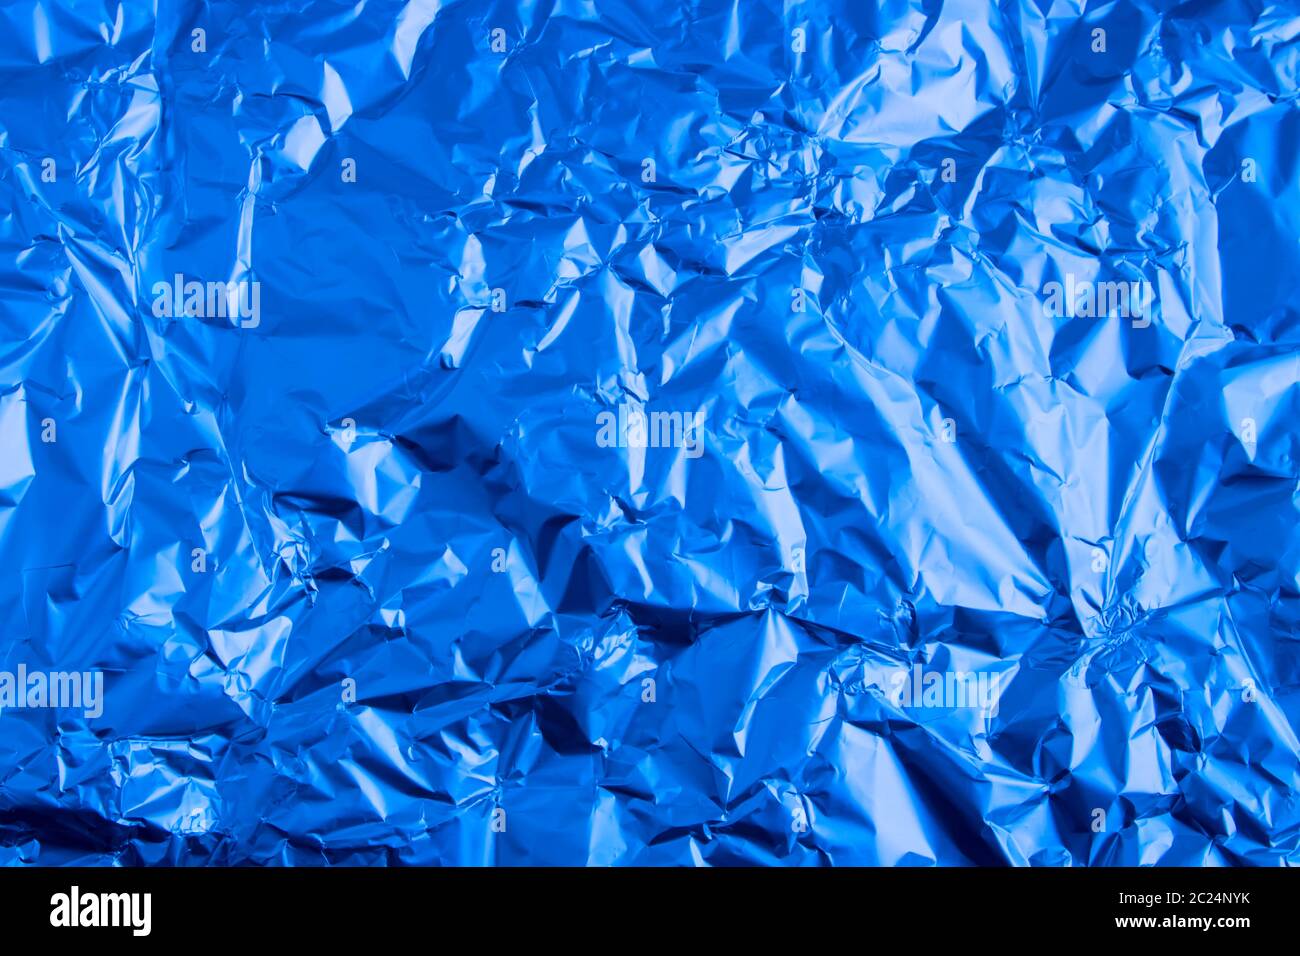 Abstract trendy blue colored crumpled foil texture background. 2020 year color trend concept. Stock Photo